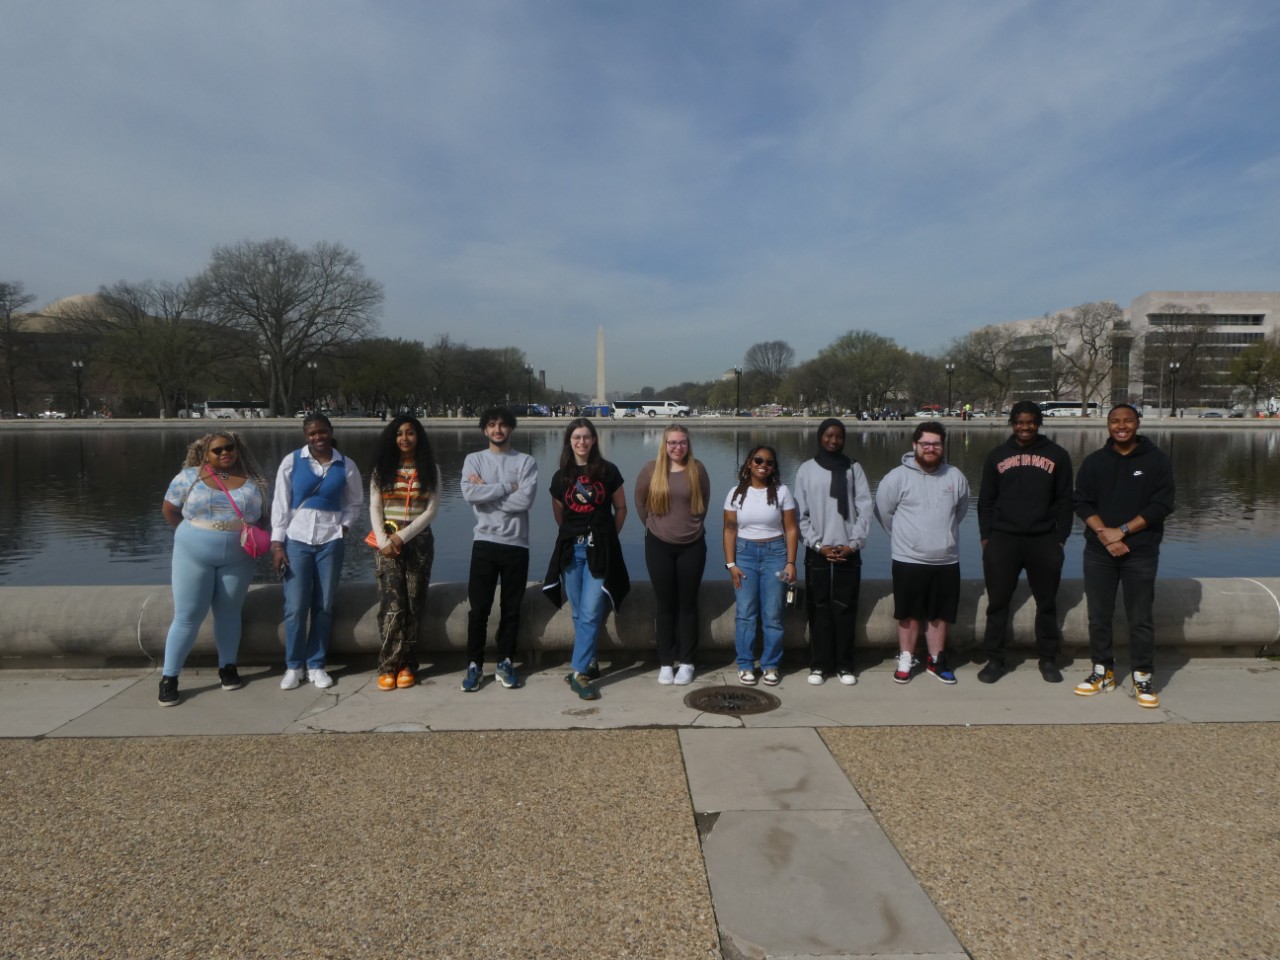 Eleven students from UC stand in front of the Washington Monument in Washington DC